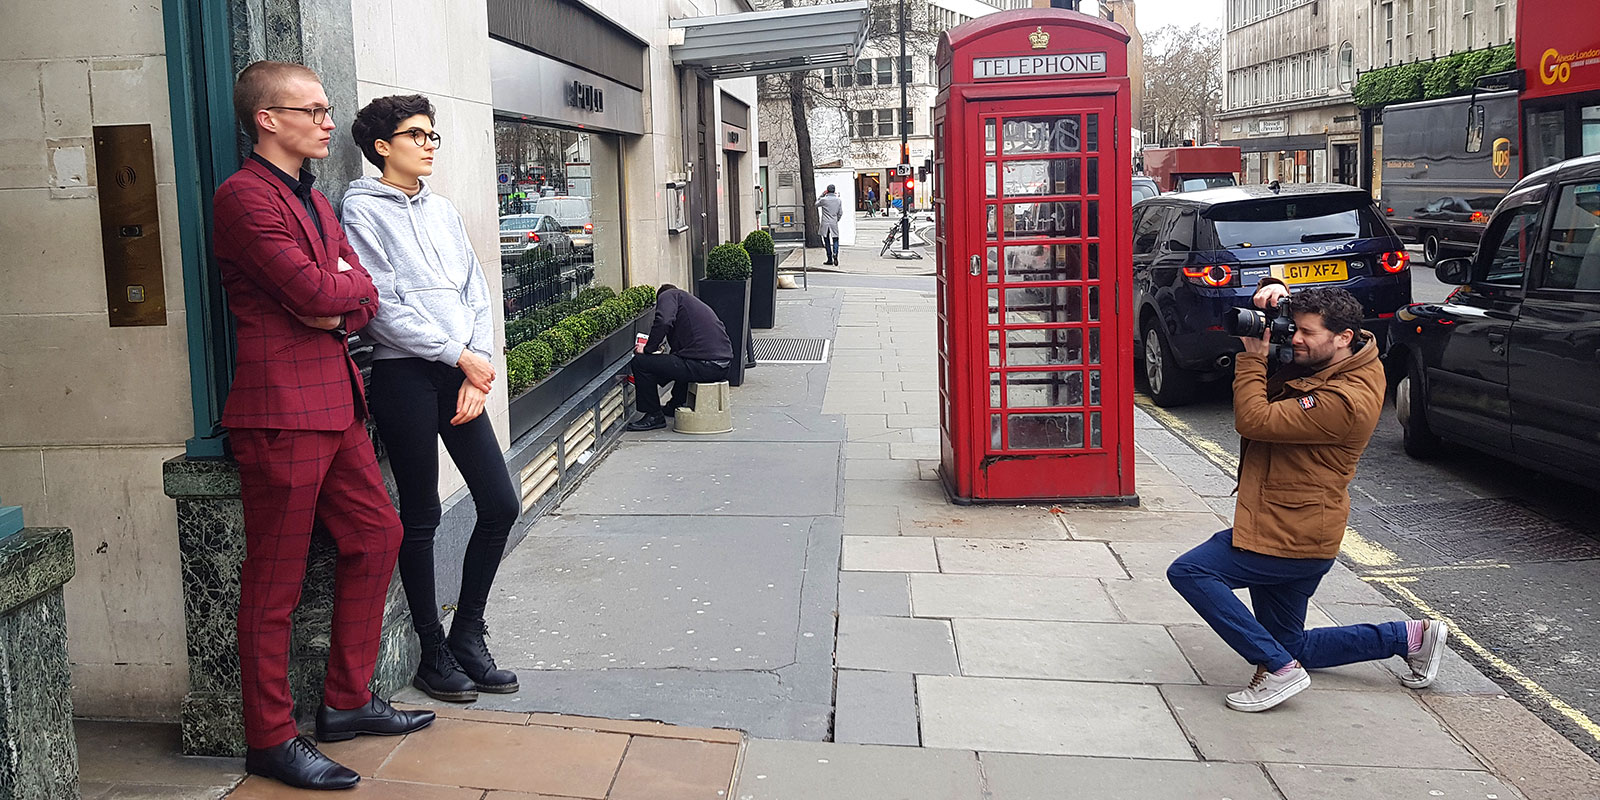 Two Catch London models being photographed in front of red phone booth for Boots 2019 campaign